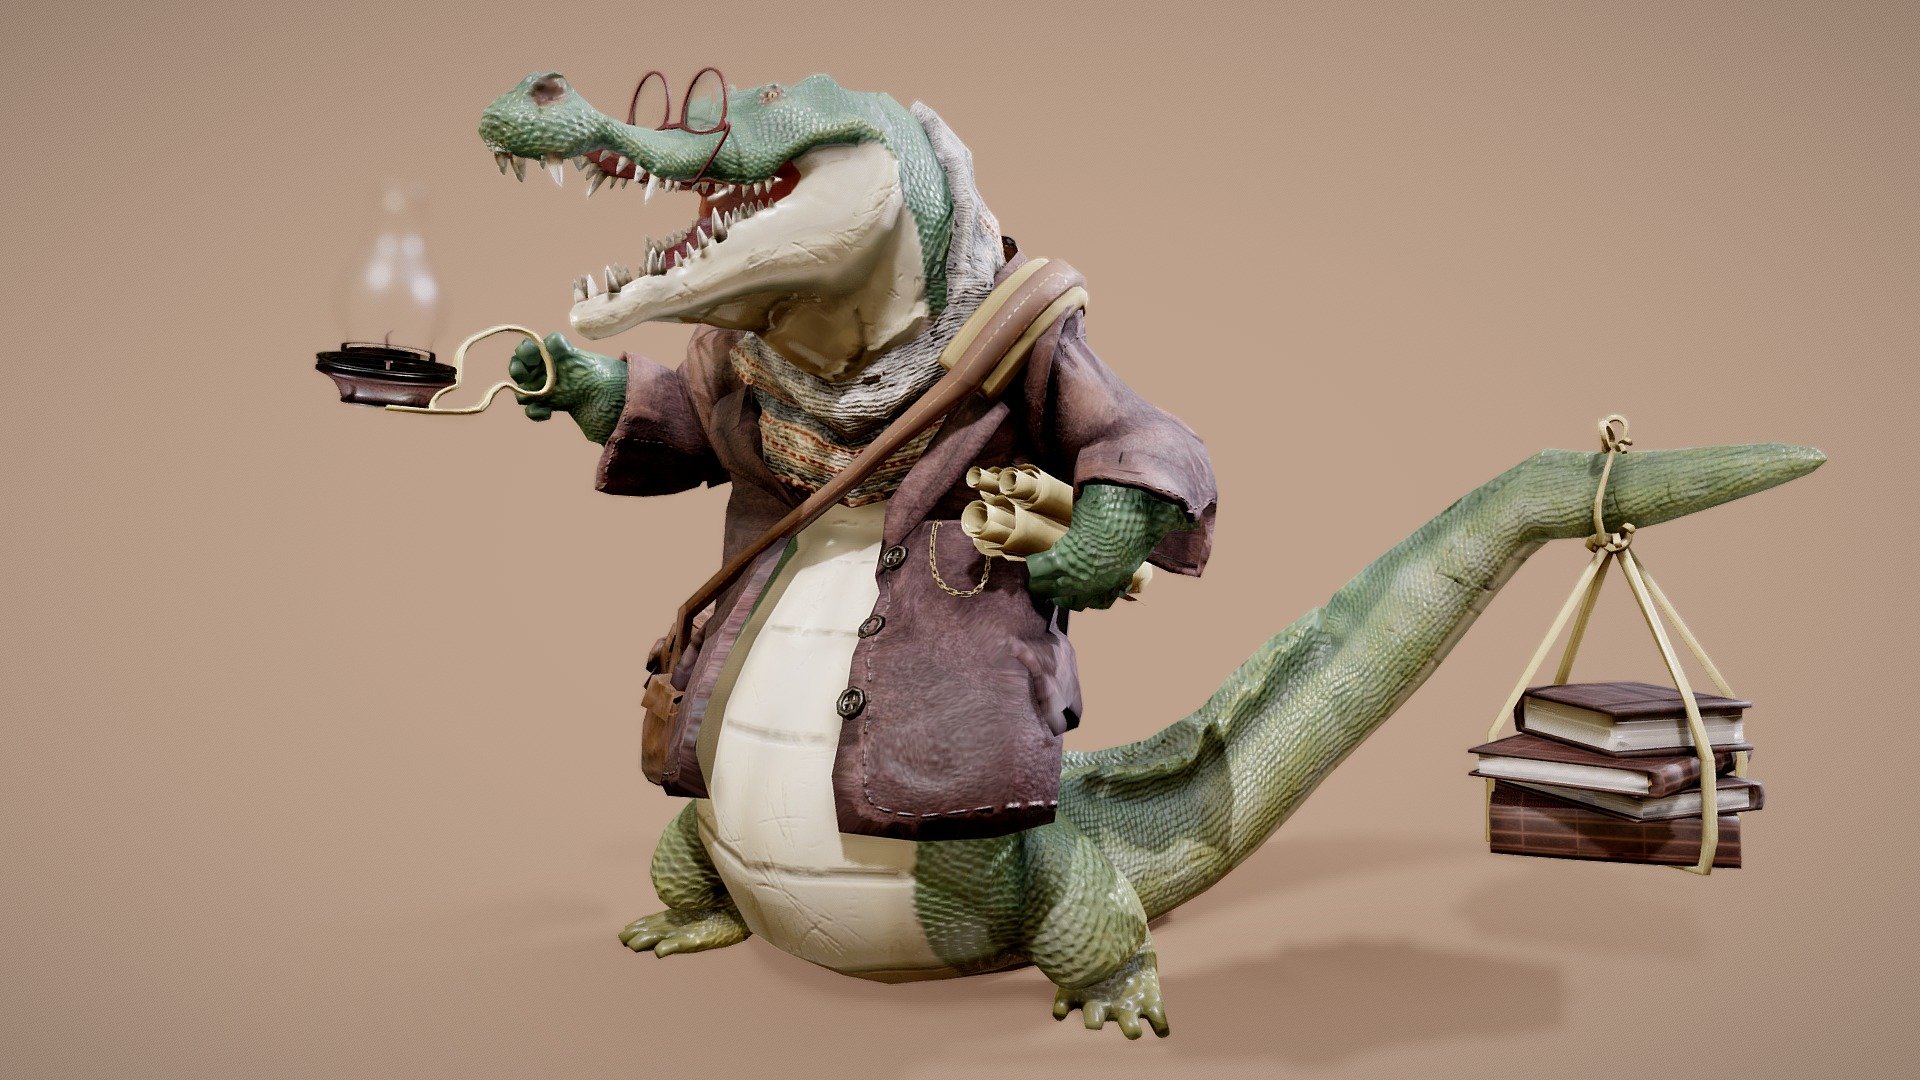 A researcher who uses his lizard skills to get to unknown places.

Created in Blender, textured in SubstancePainter.
https://www.artstation.com/artwork/rAJ4b2 - Croco Explorer - 3D model by Tom Breuer (@TomBreuer) 3d model